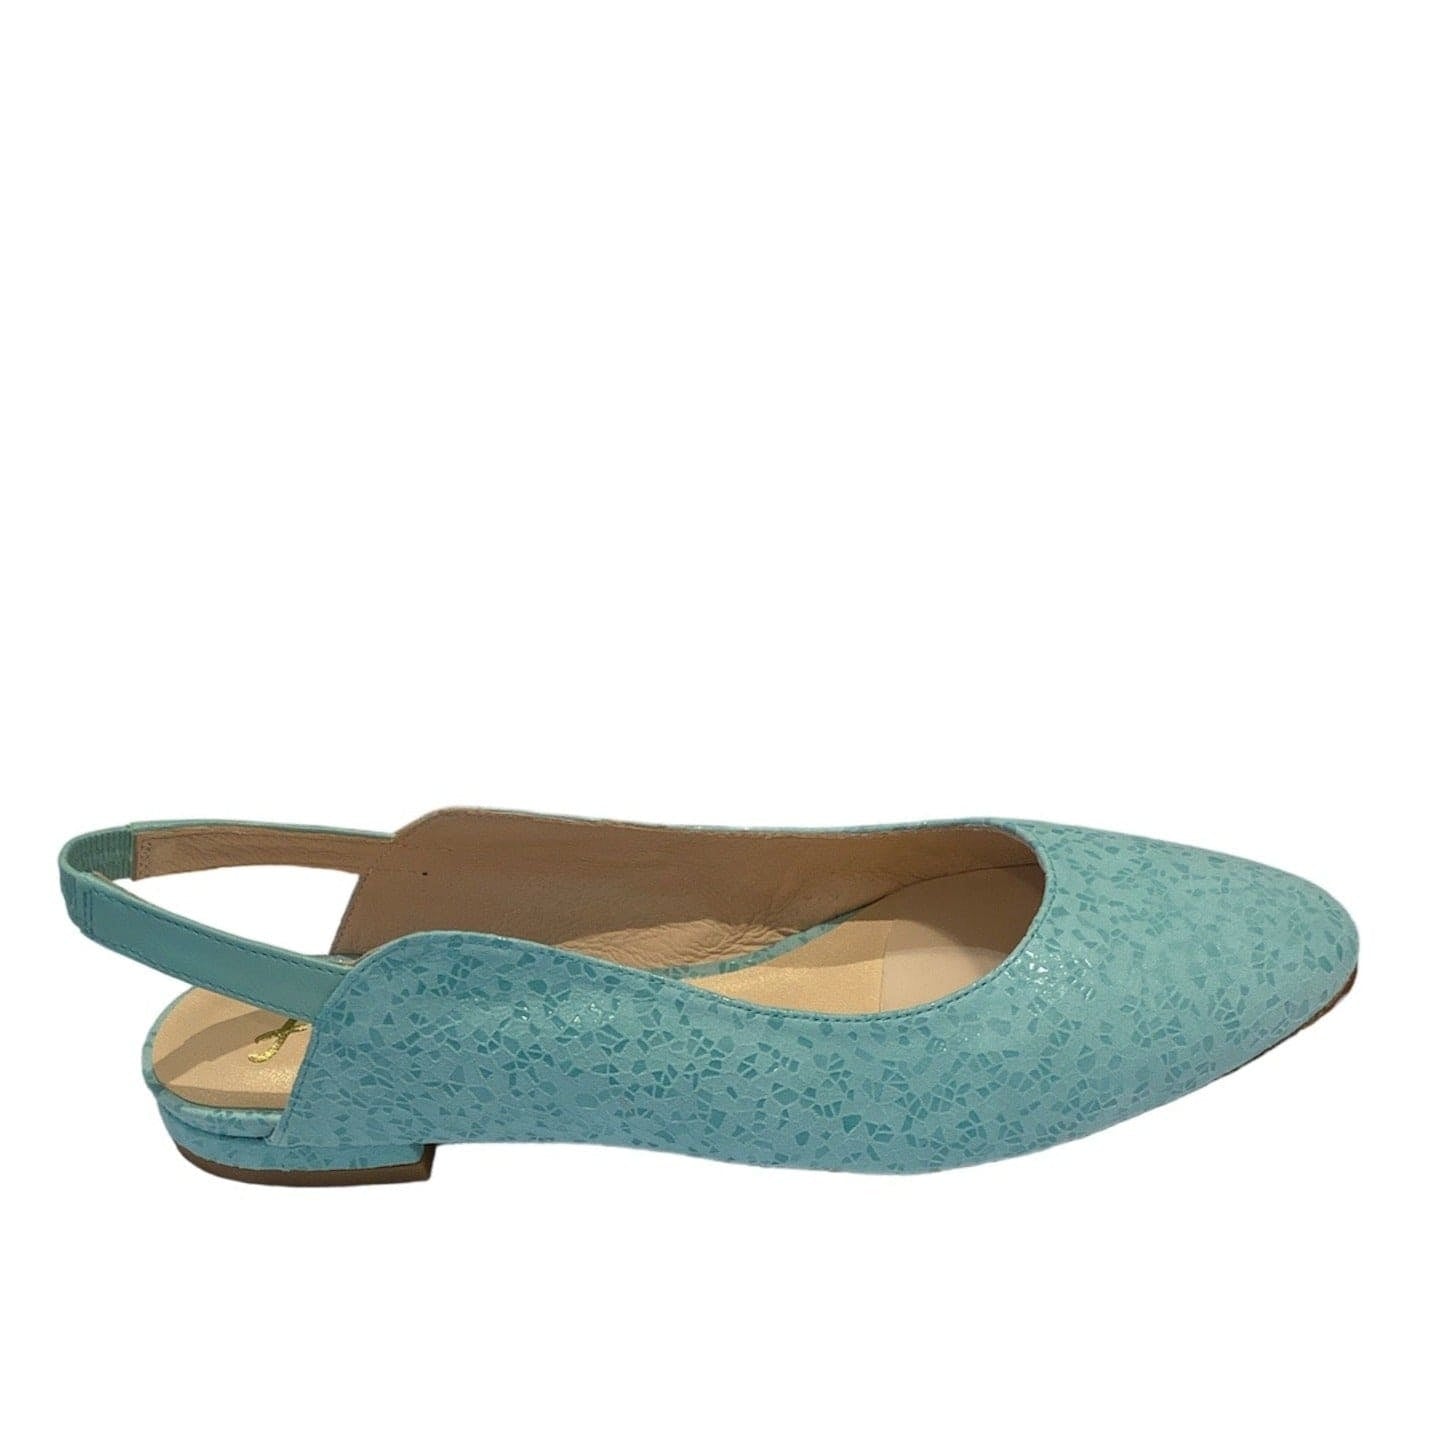 French Sole Women's Shoes Turquoise / 6.5 French Sole Lola